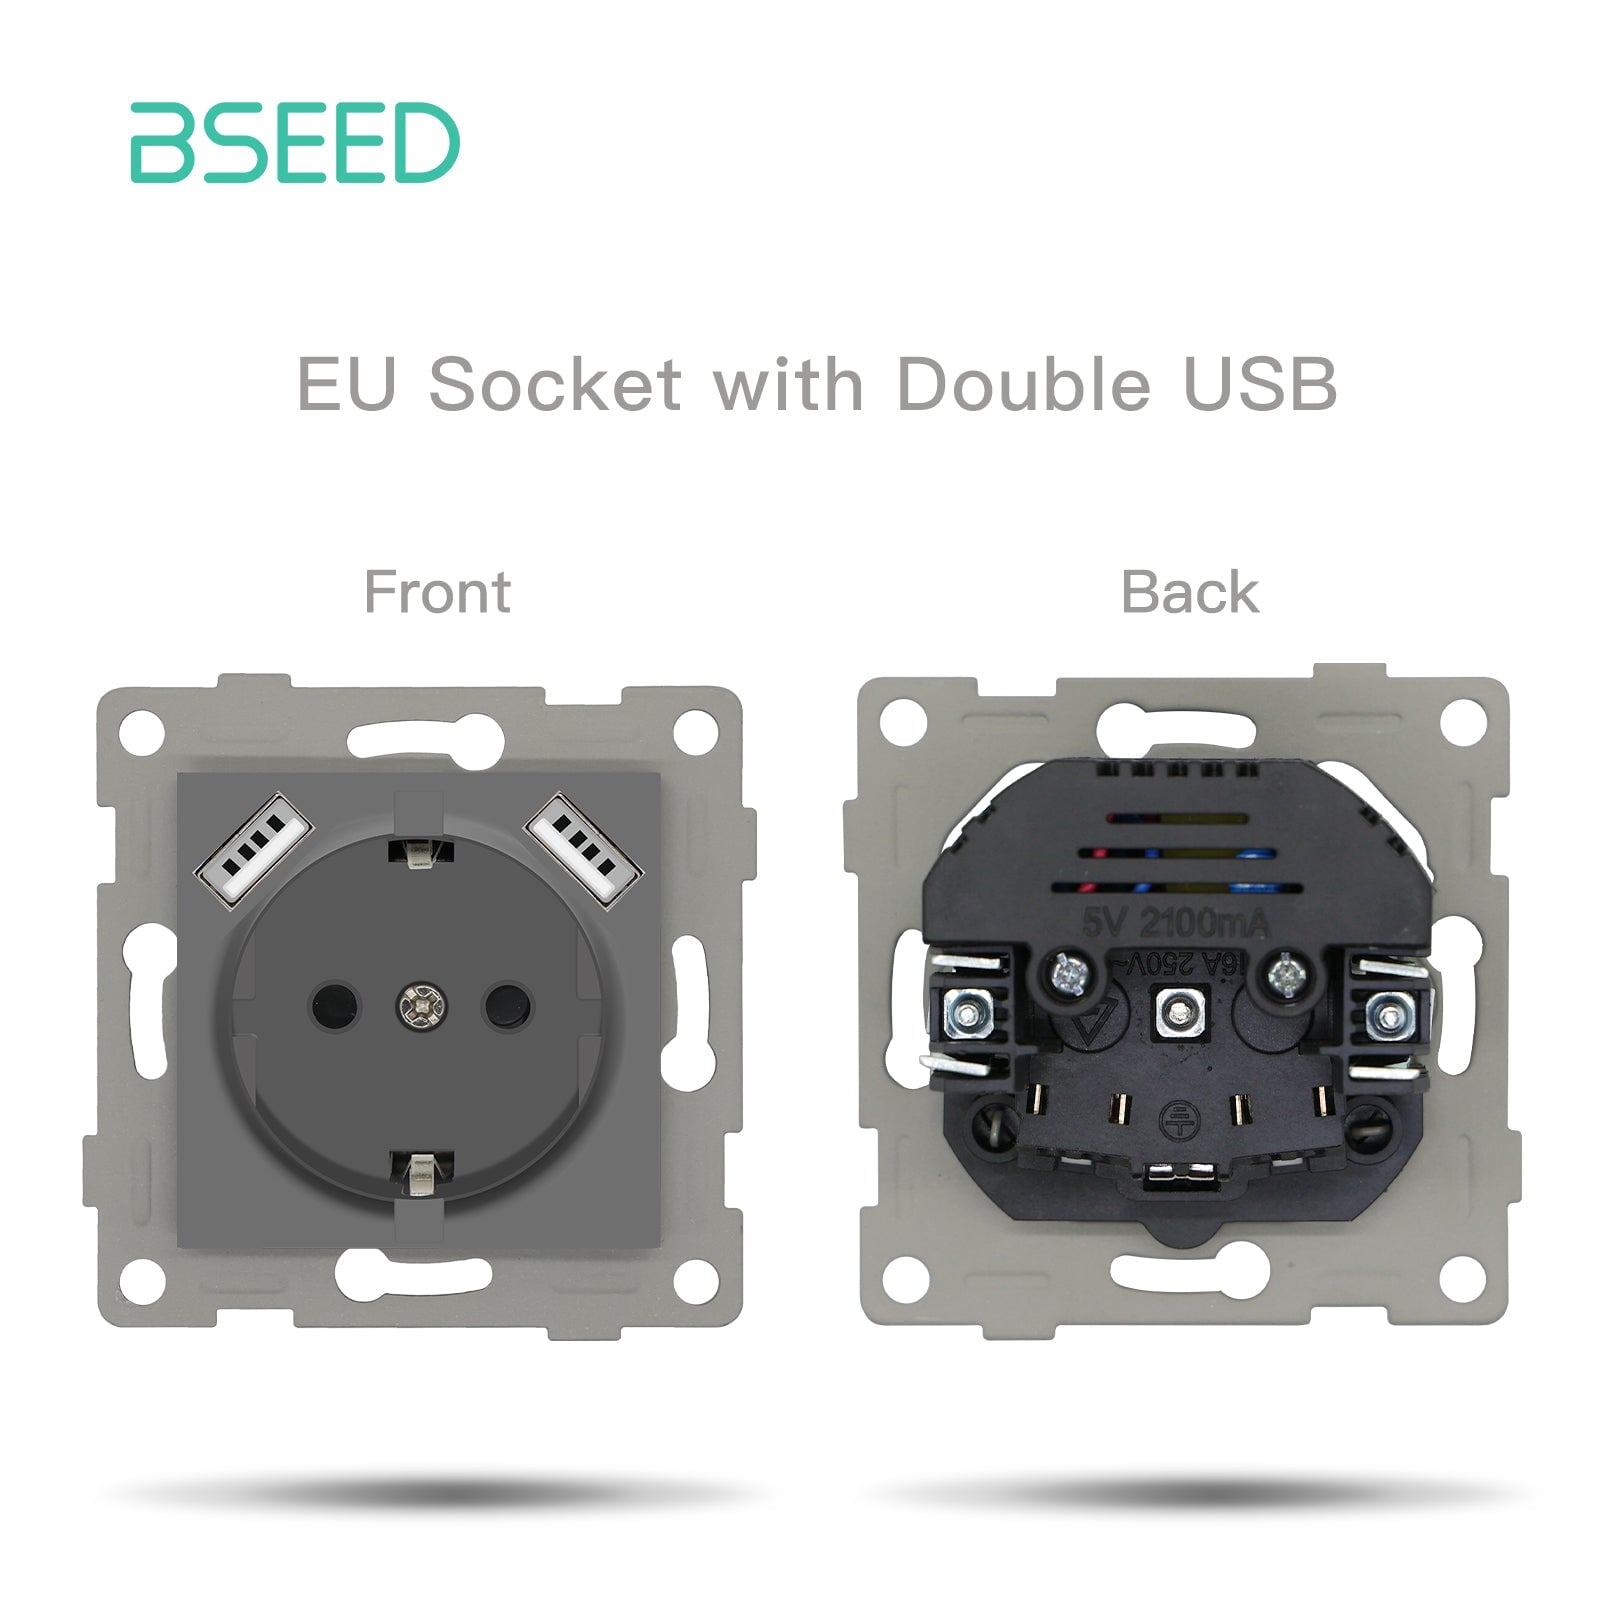 BSEED EU standard Function Key Cover Socket with Claw technology DIY Parts Power Outlets & Sockets Bseedswitch GREY eu socket with duoble usb 